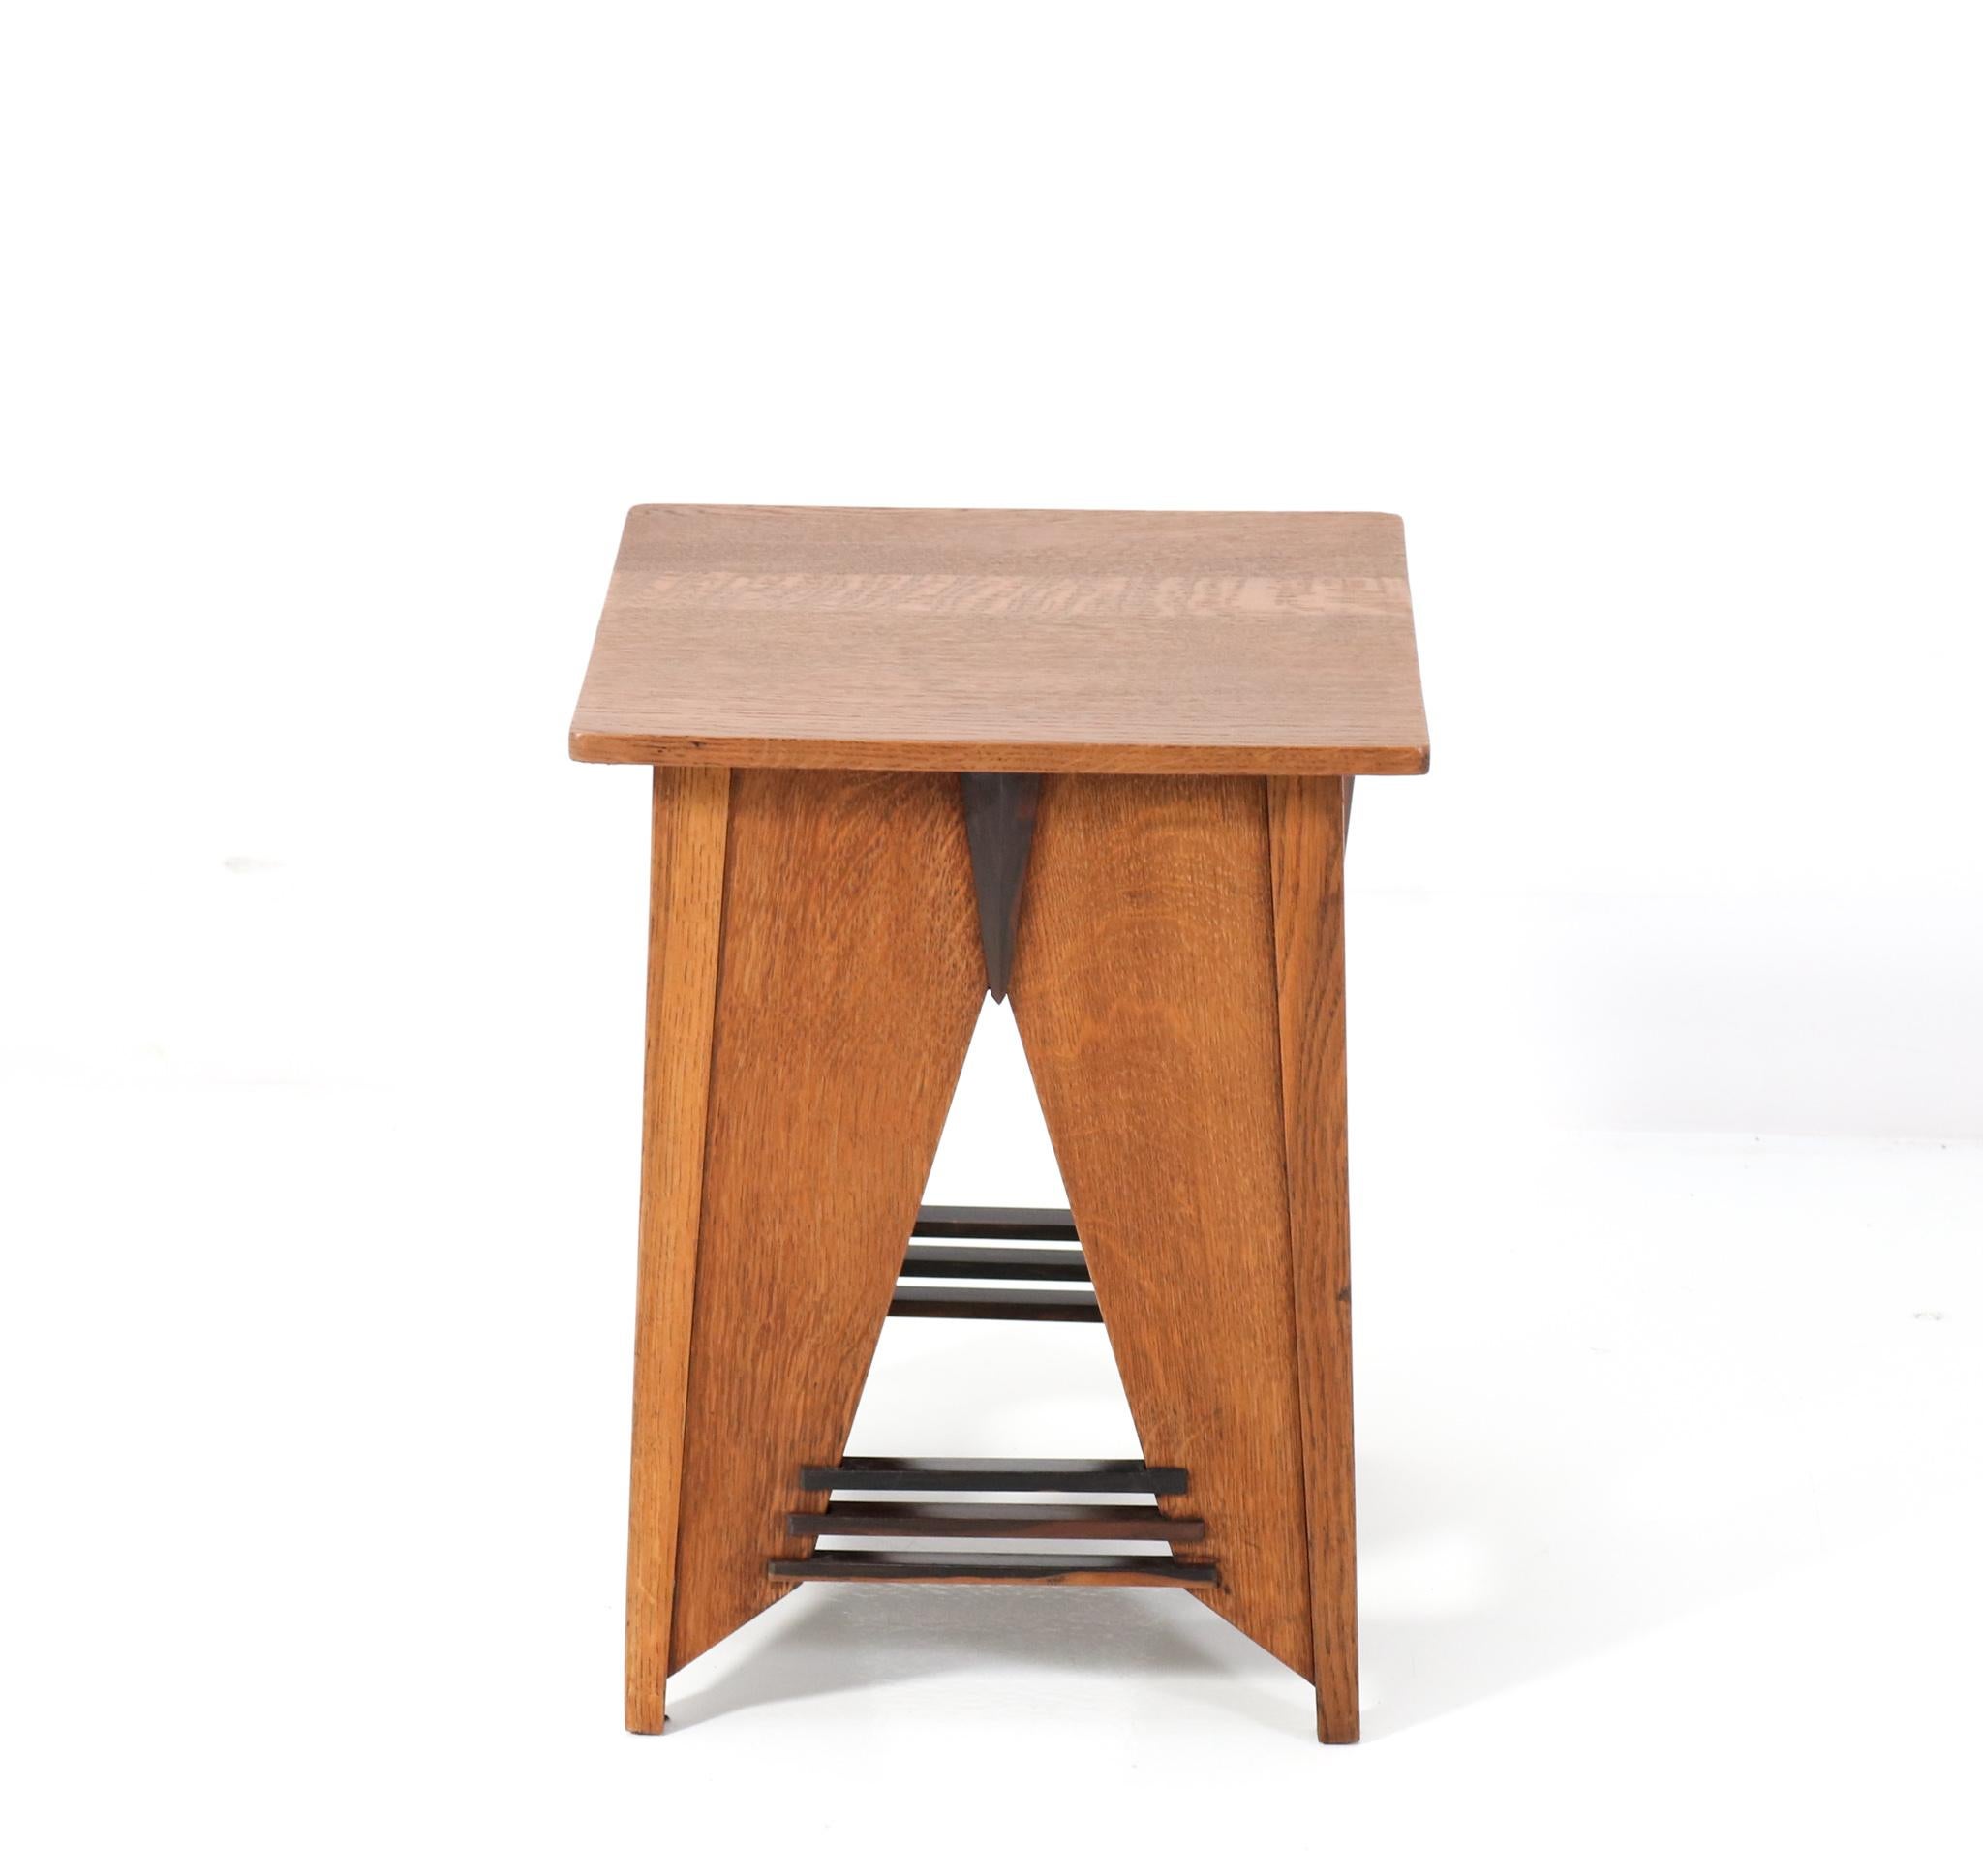 Magnificent and rare Art Deco Modernist side table or pedestal.
Design by P.E.L. Izeren for Genneper Molen.
Striking Dutch design from the 1920s.
Solid oak with original solid macassar ebony lining.
The modernist look of this wonderful Art Deco